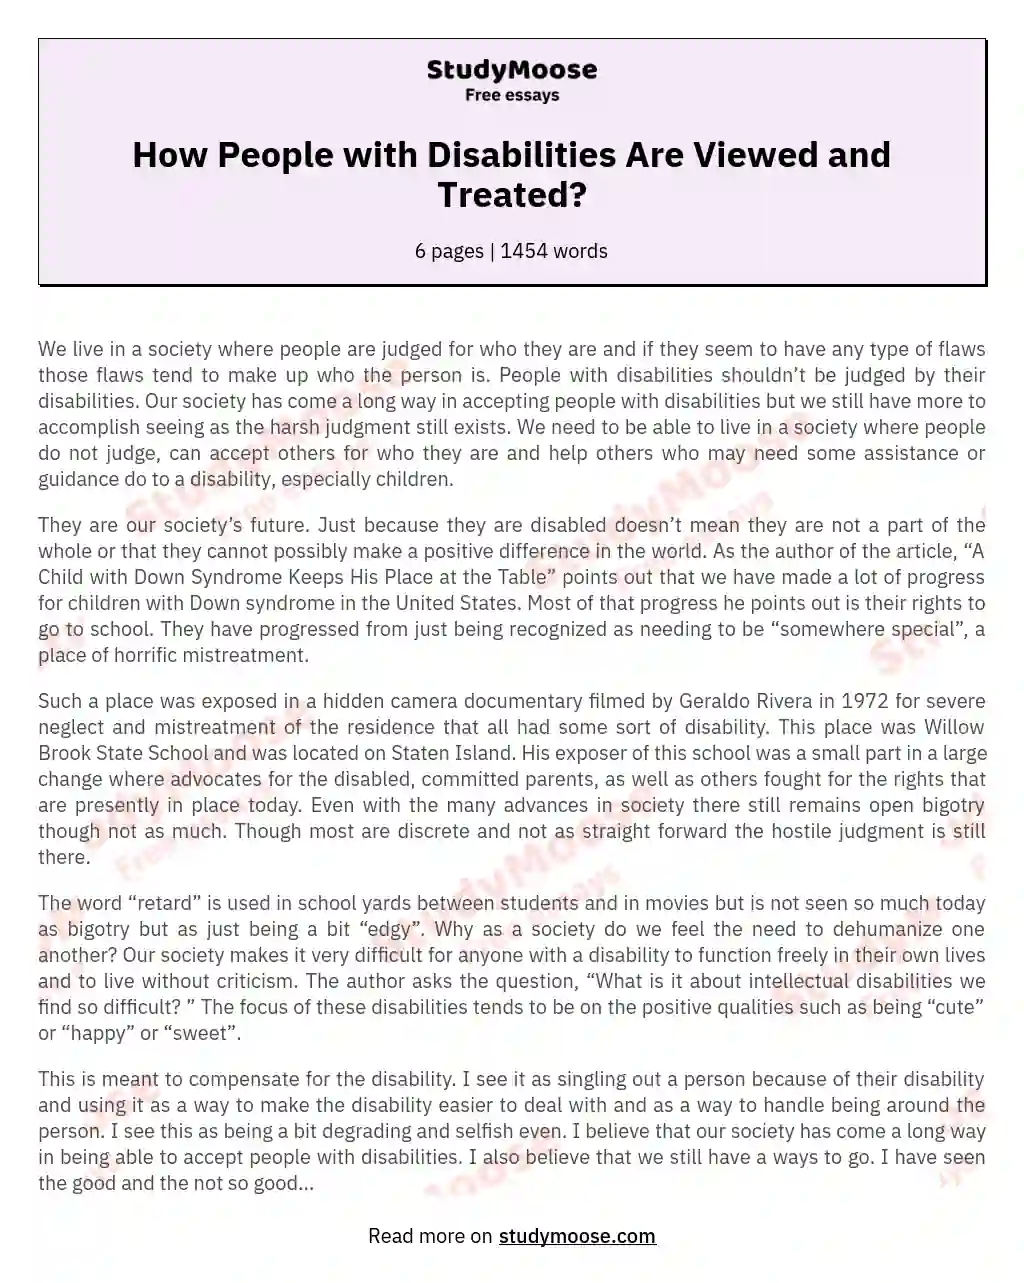 How People with Disabilities Are Viewed and Treated? essay